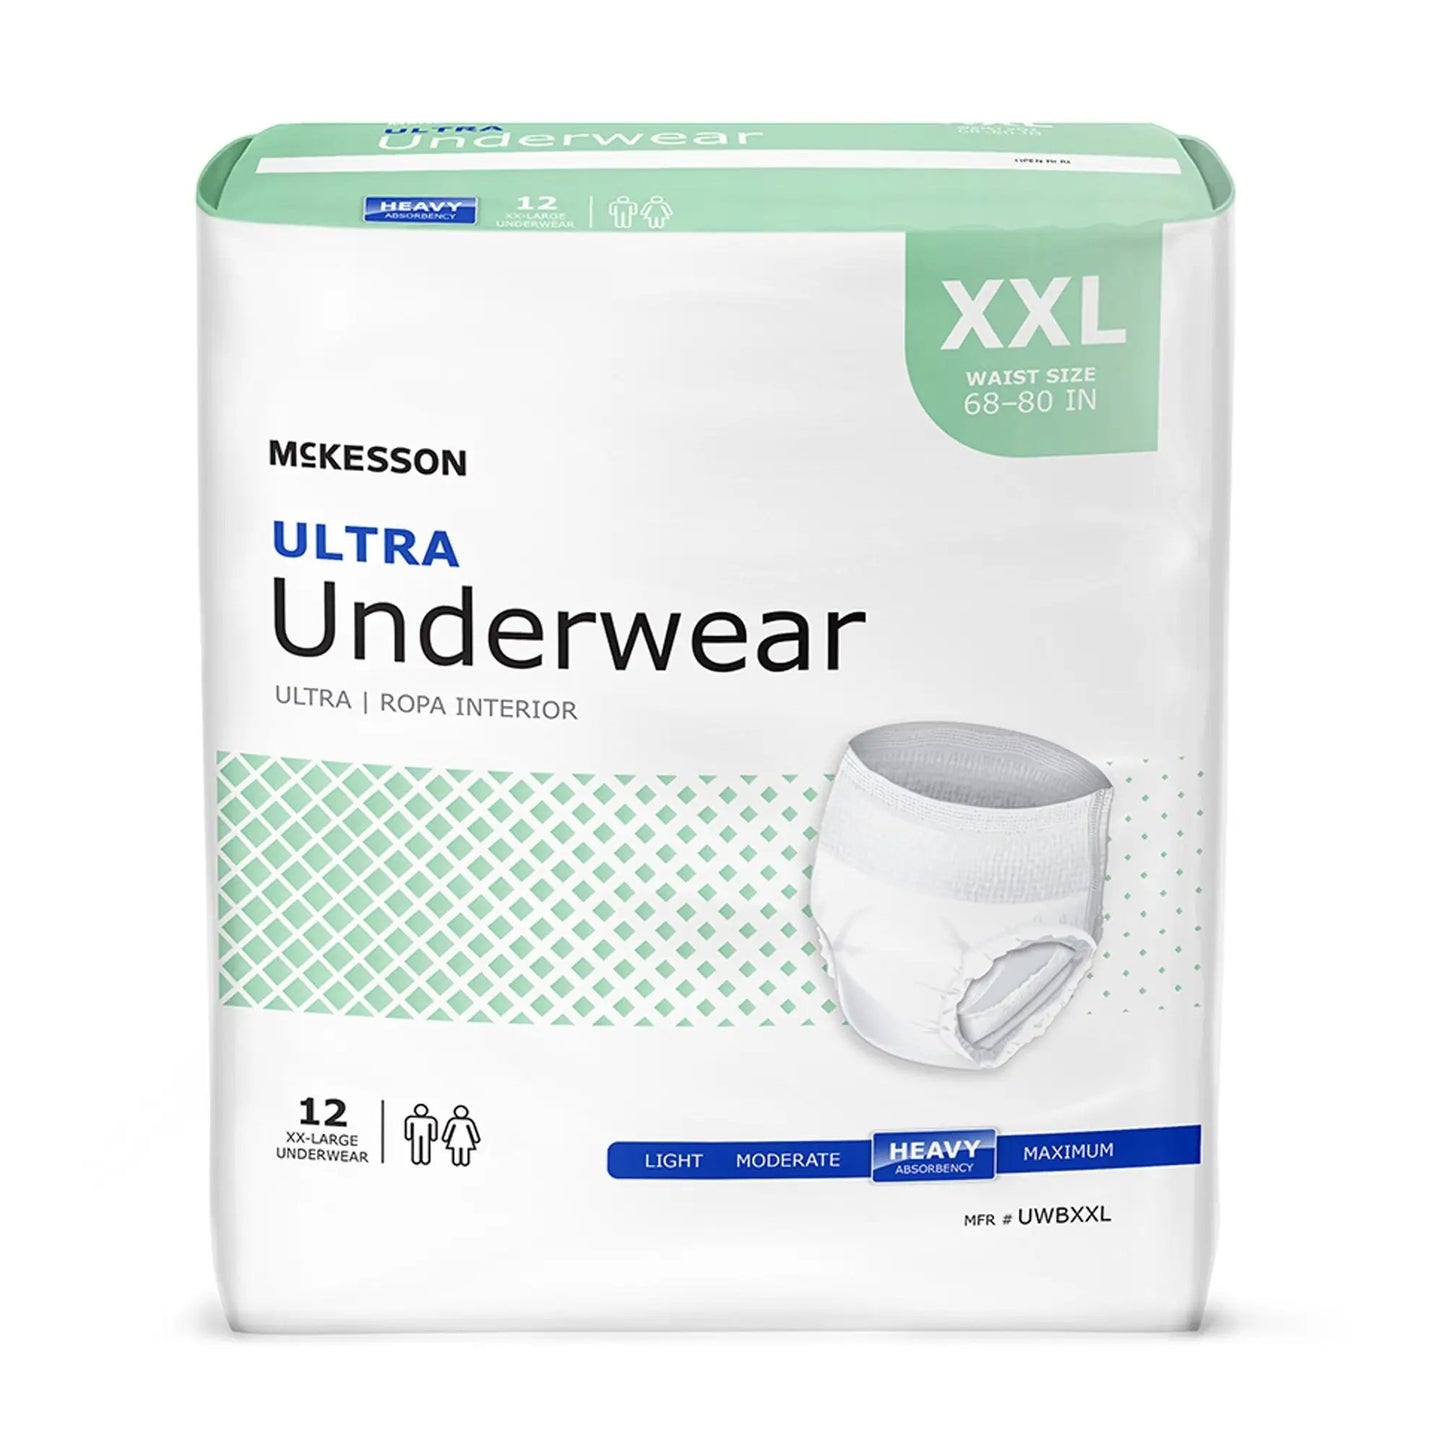 McKesson Unisex Adult Absorbent Underwear Ultra Pull On with Tear Away Seams